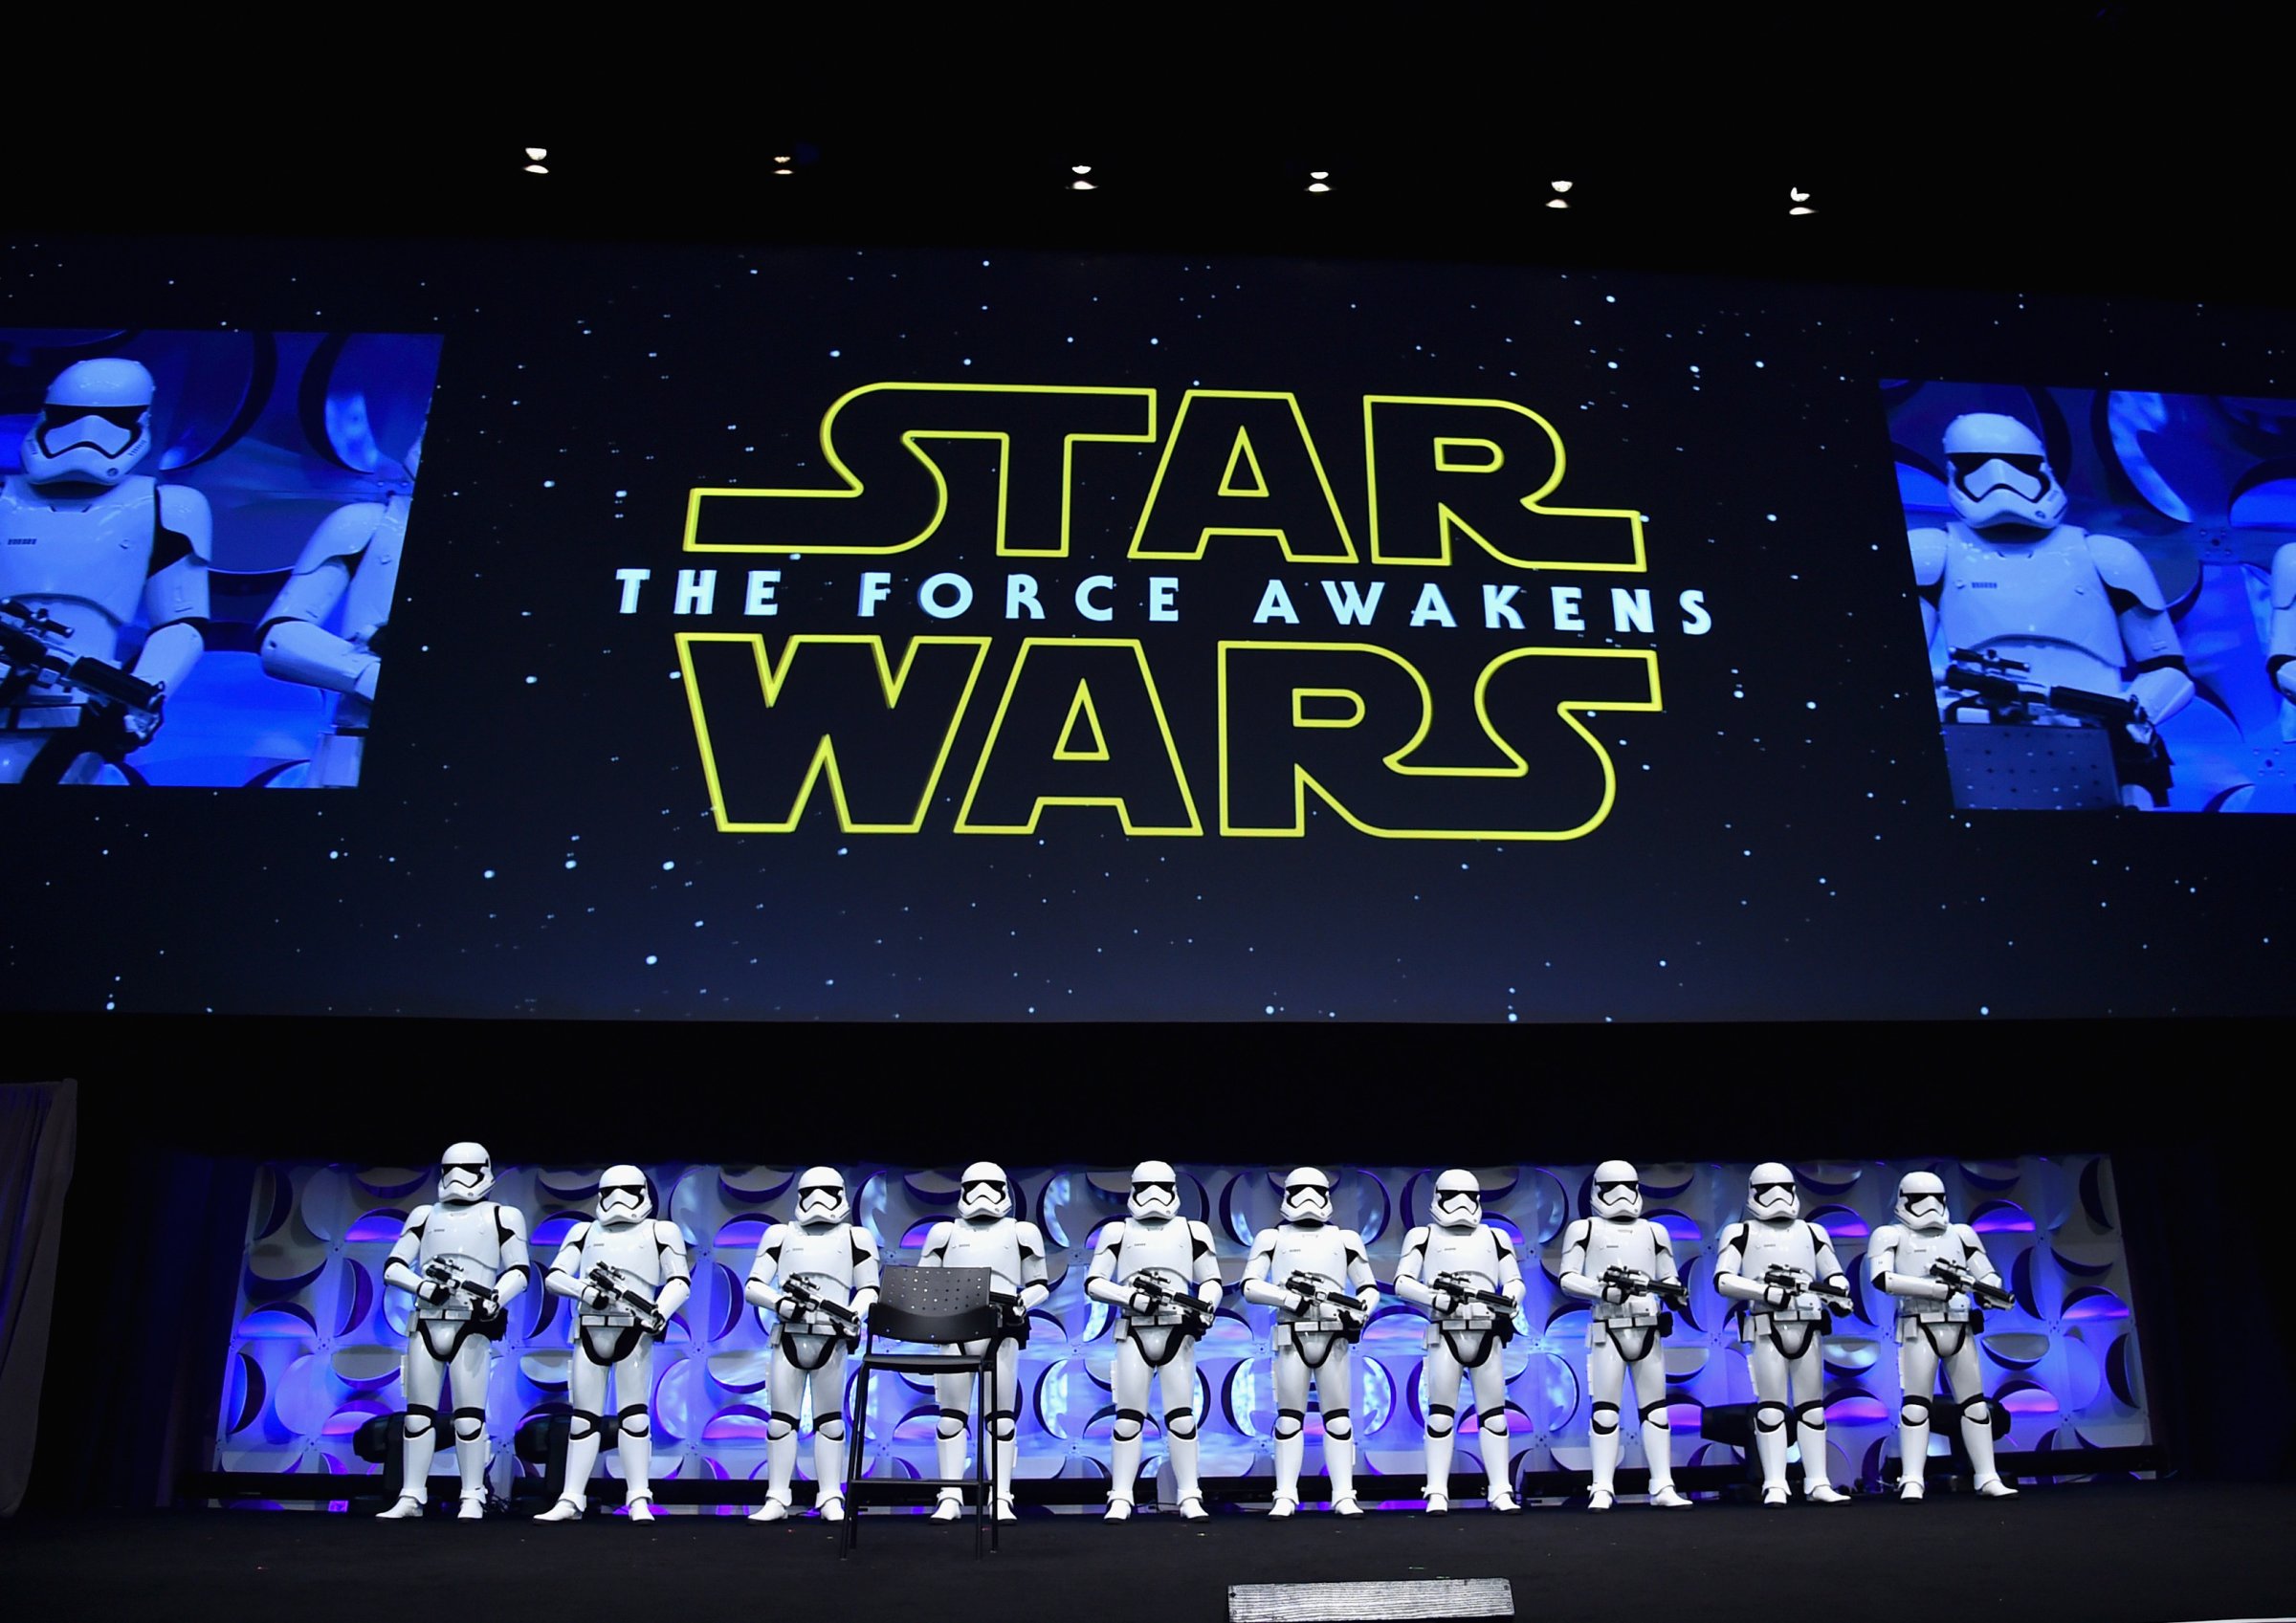 Stormtroopers onstage during Star Wars Celebration 2015 on April 16, 2015 in Anaheim, California.